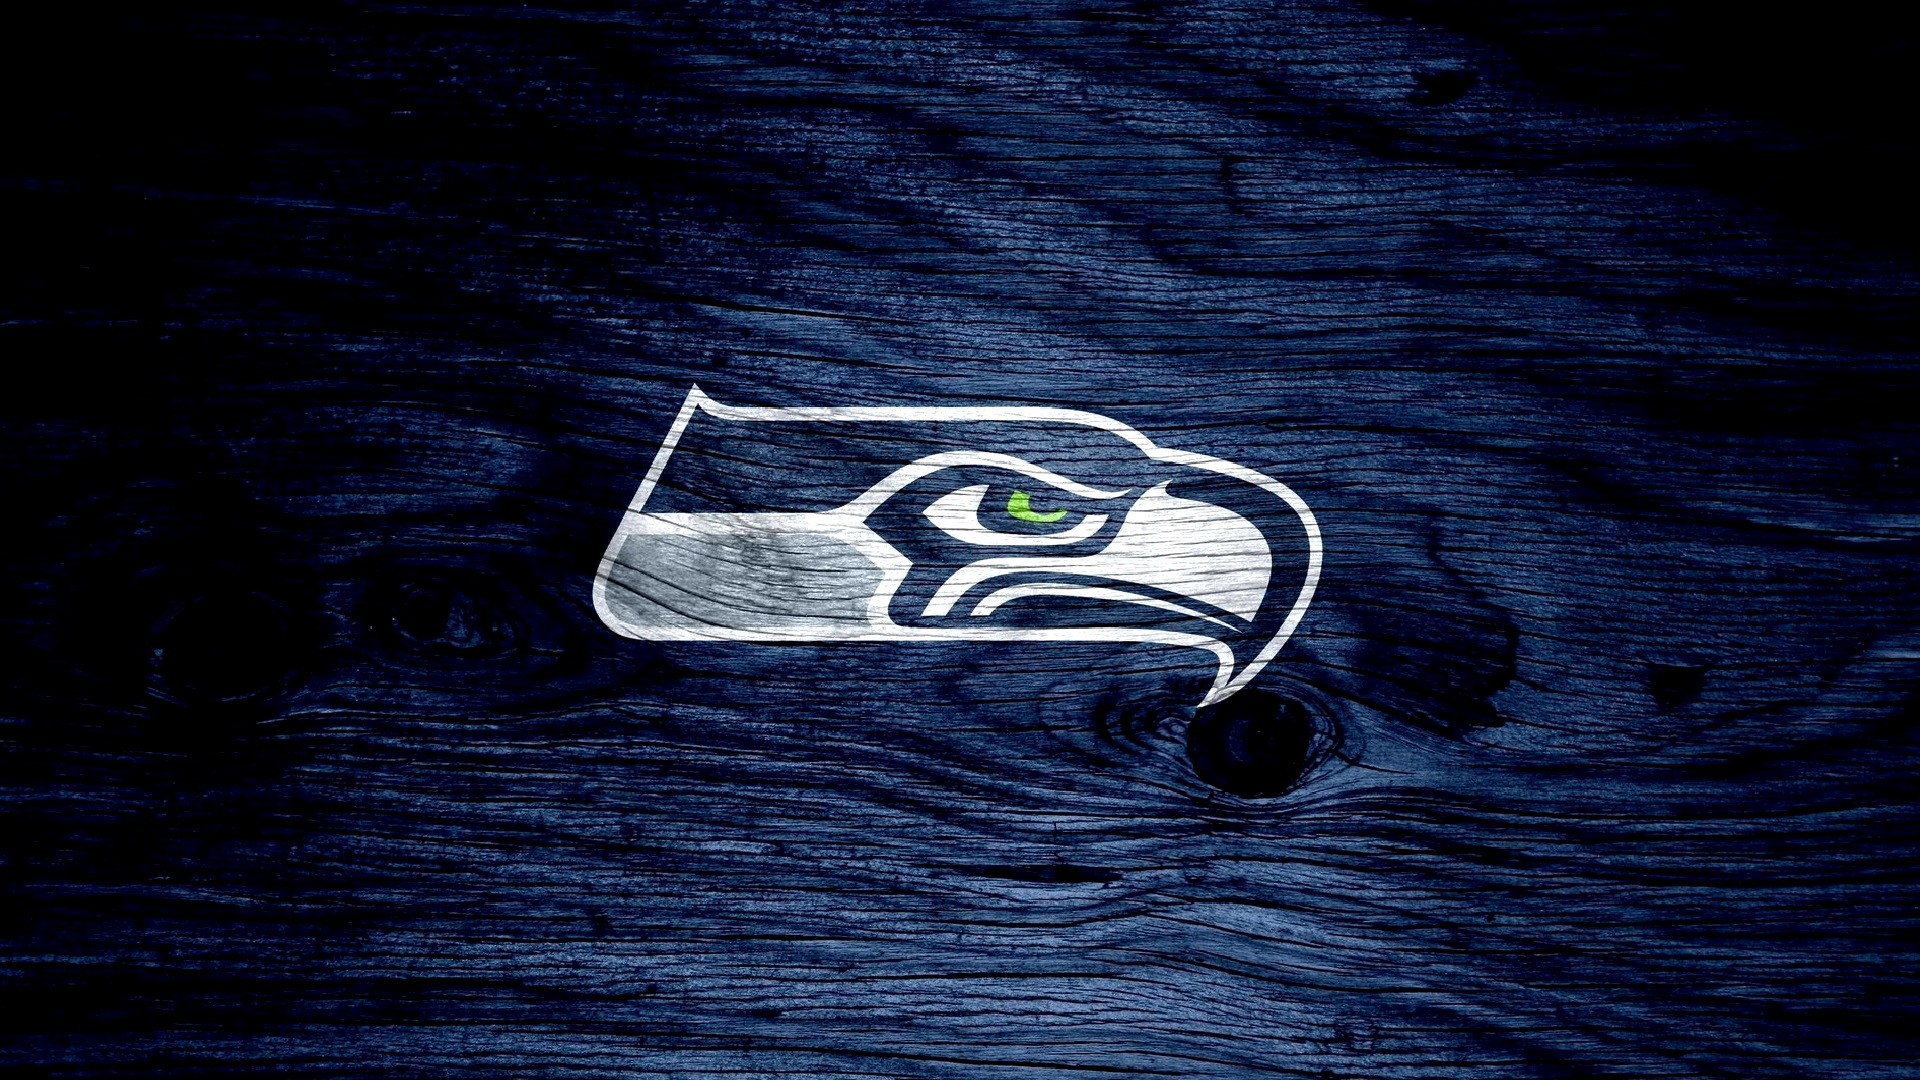 Seattle Seahawks Logo Wallpaper HD Laptop With high-resolution 1920X1080 pixel. You can use and set as wallpaper for Notebook Screensavers, Mac Wallpapers, Mobile Home Screen, iPhone or Android Phones Lock Screen